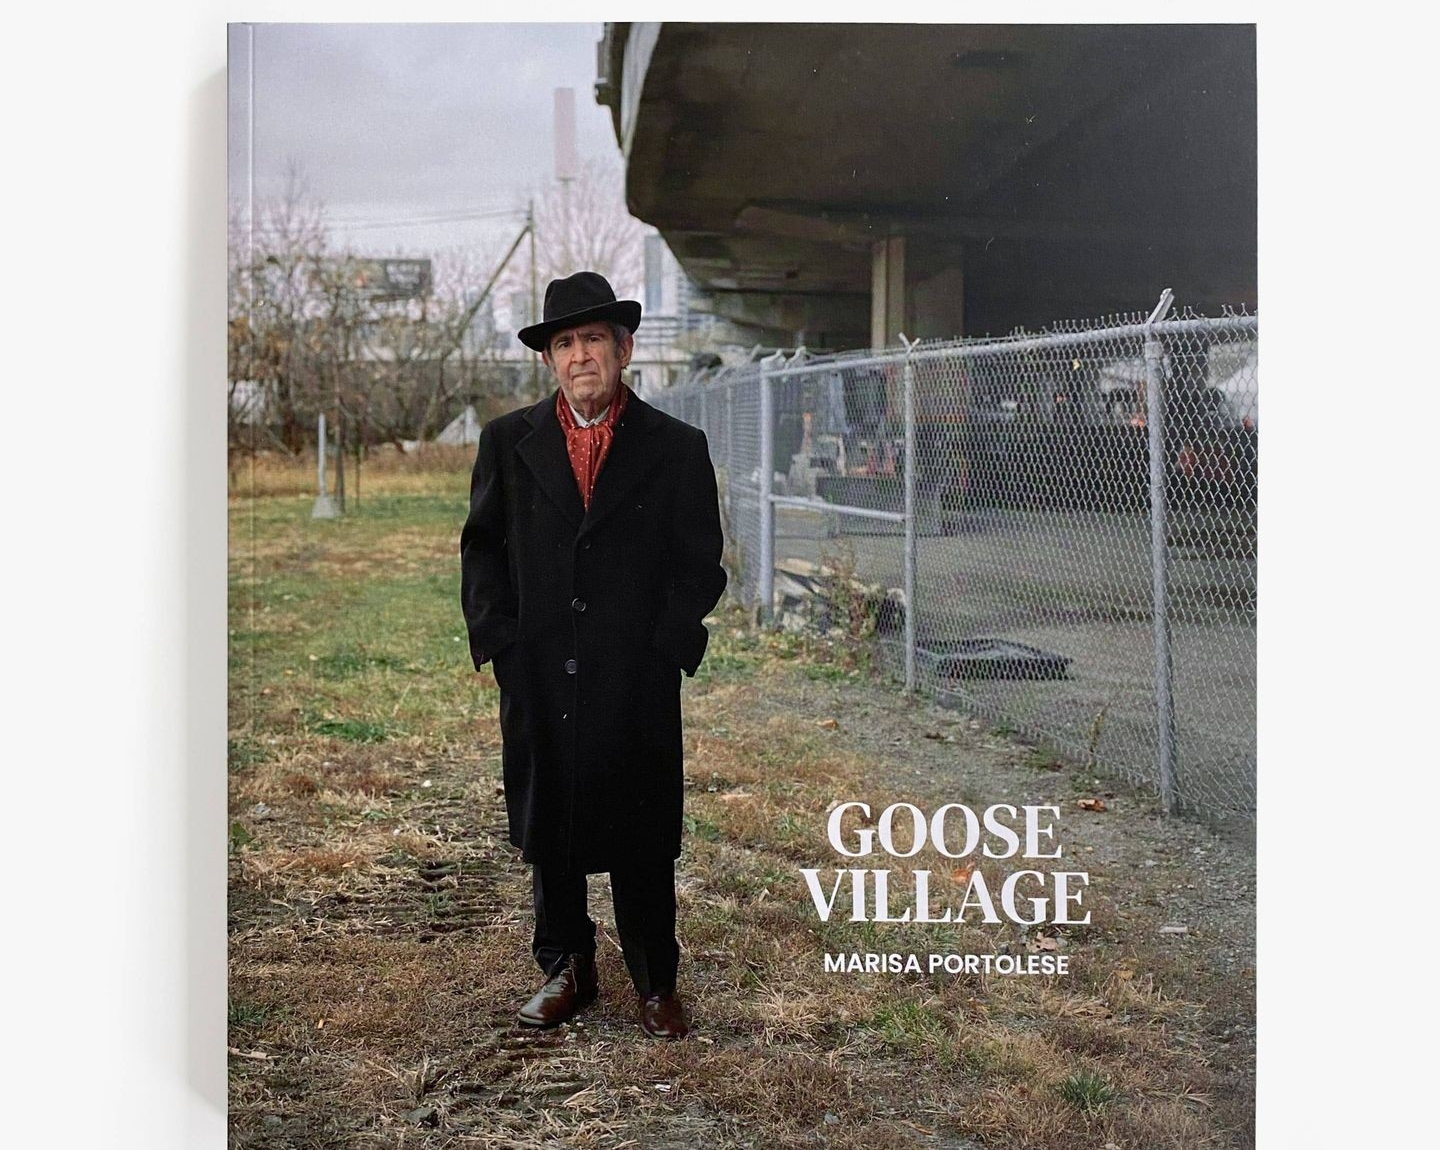 Book release of "Goose Village": A chronicle of displaced lives and lost heritage